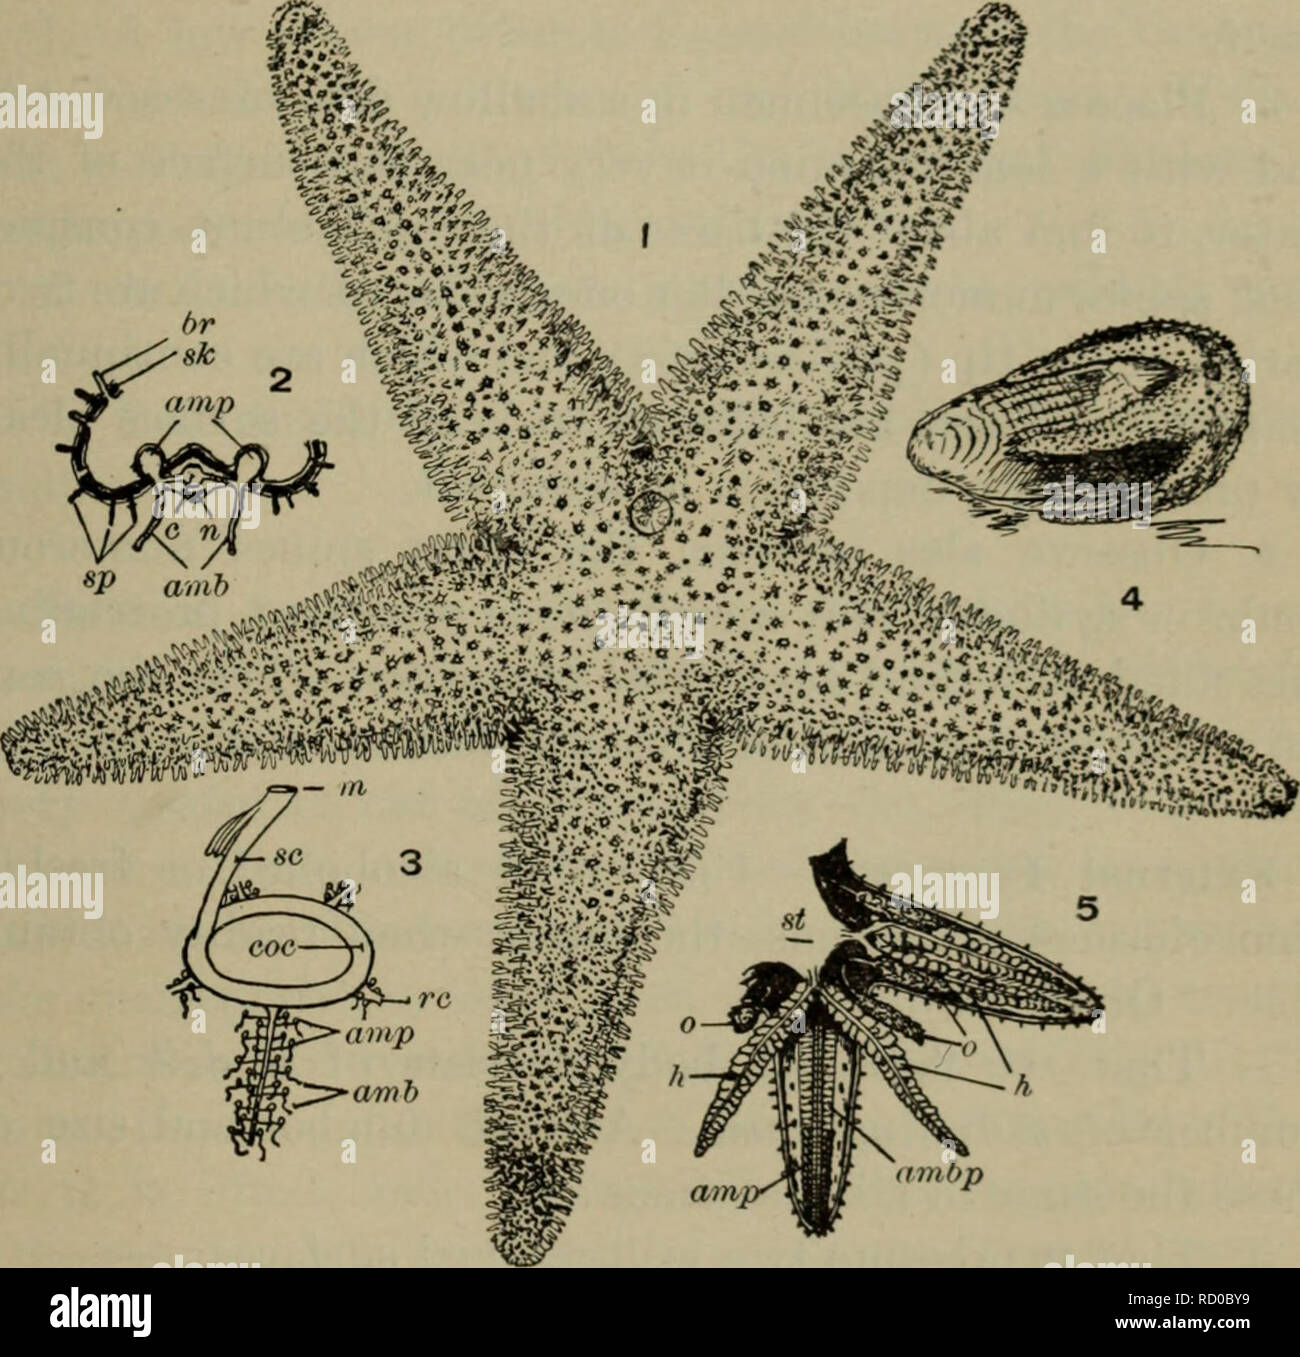 . Elementary lessons in zoölogy : a guide in studying animal life and structure in field and laboratory. Zoology. THE STARFISH. 267 upturned arm note that these spring from a groove which extends along the lower side of the arm its entire length. Observe that these tube feet are pushed out and drawn in. Starfish.—1. Starfish (Asterias rmlgaris), a. iirge dried specimen one half natural size. 2. Diagram of cross section of oral part of an arm: br, branchial tentacle; sk, calcareous plate of skeleton (in heavy black) ; sp, spines (those designated are on an adambulacral plate); amp, ampullje; c Stock Photo